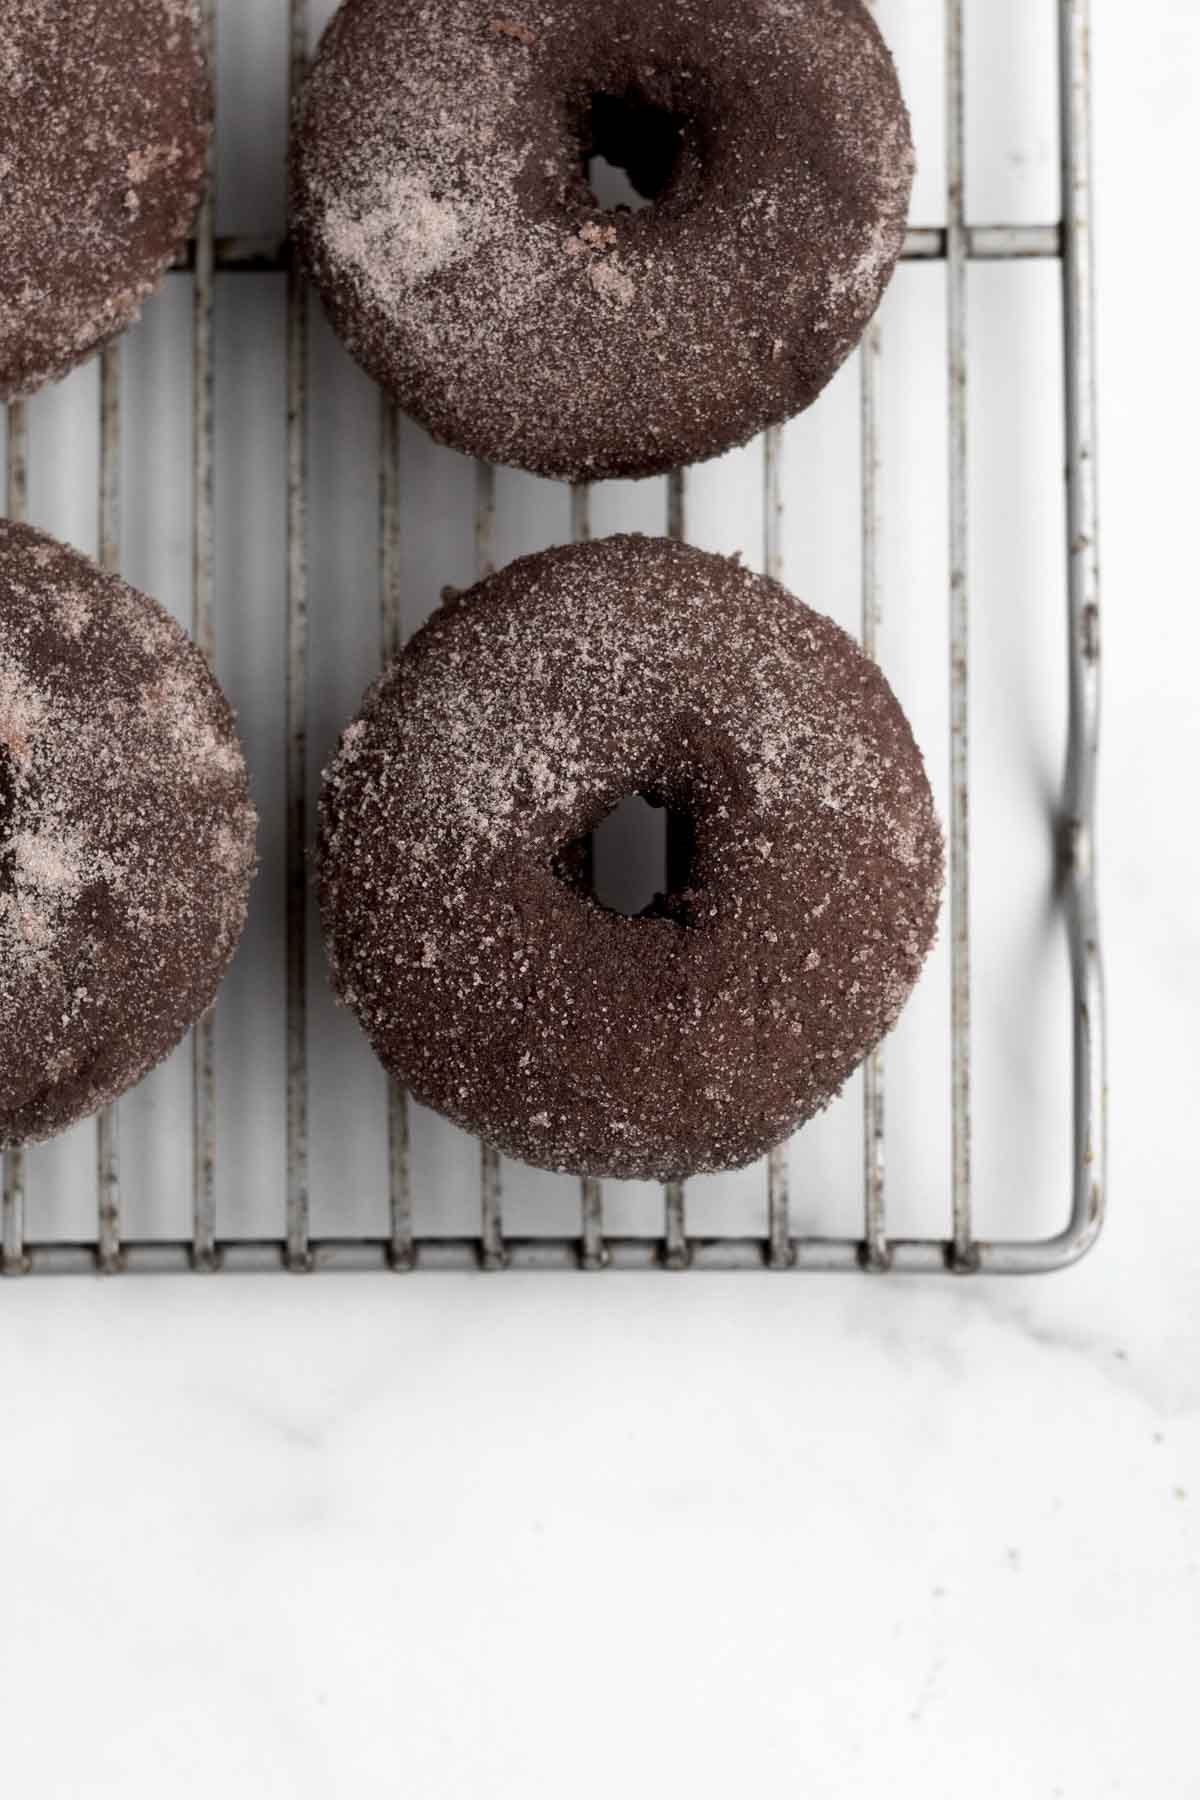 The fist coat of cocoa sugar on the donuts.